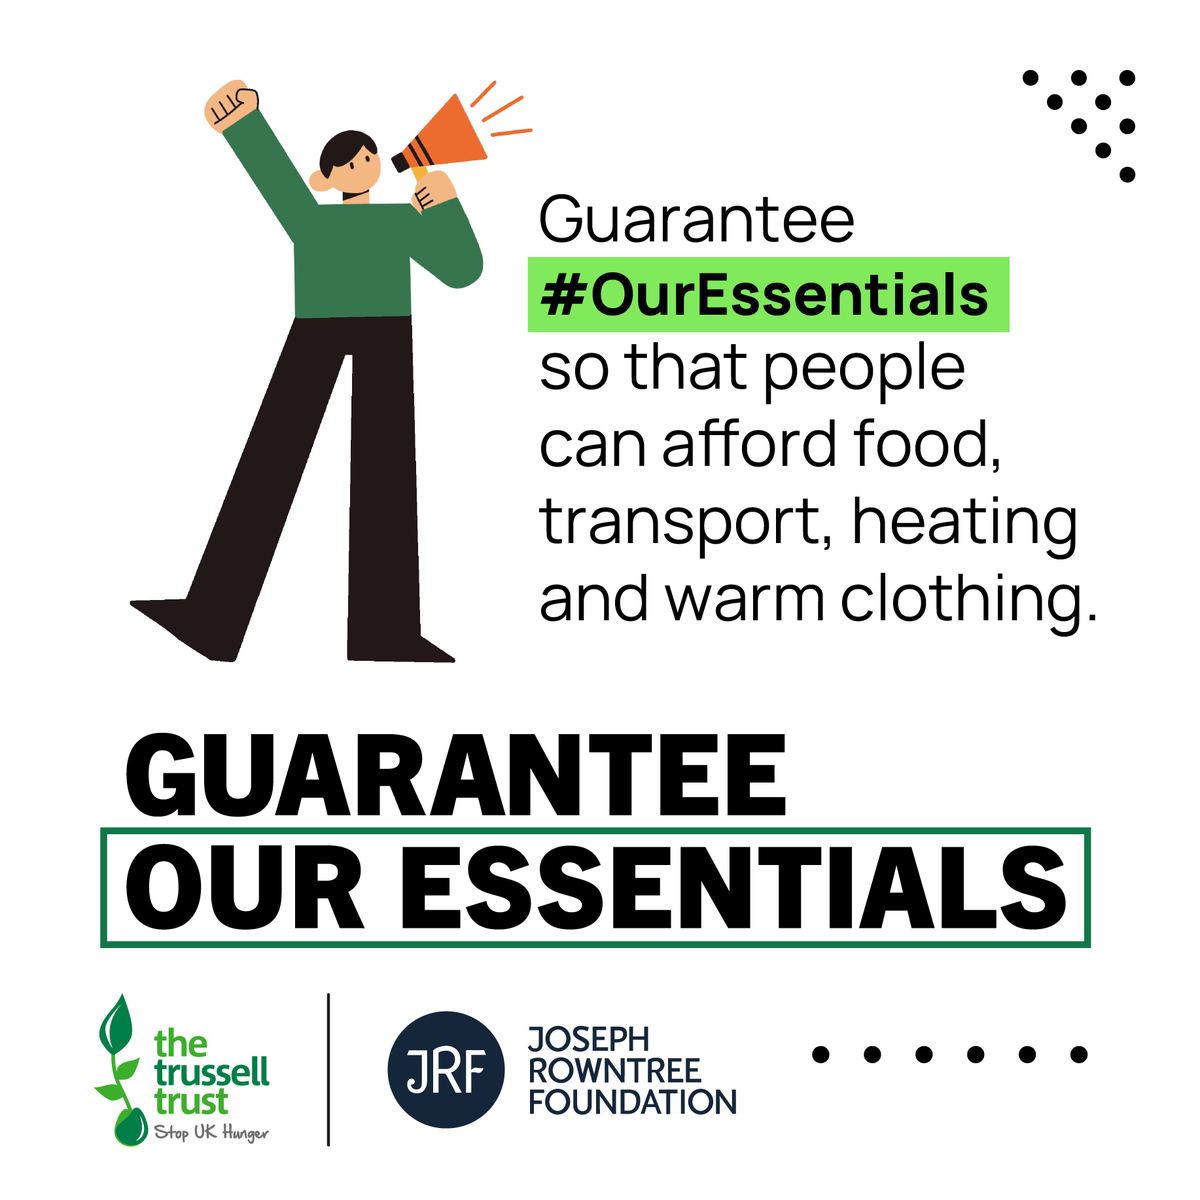 Any plan for a new economy must recognise the scale of the problem and the need to take action. An ambitious economic plan must put tackling hardship at its core. 📢 @TrussellTrust and JRF are calling on all political parties to guarantee that everyone can afford the essentials.